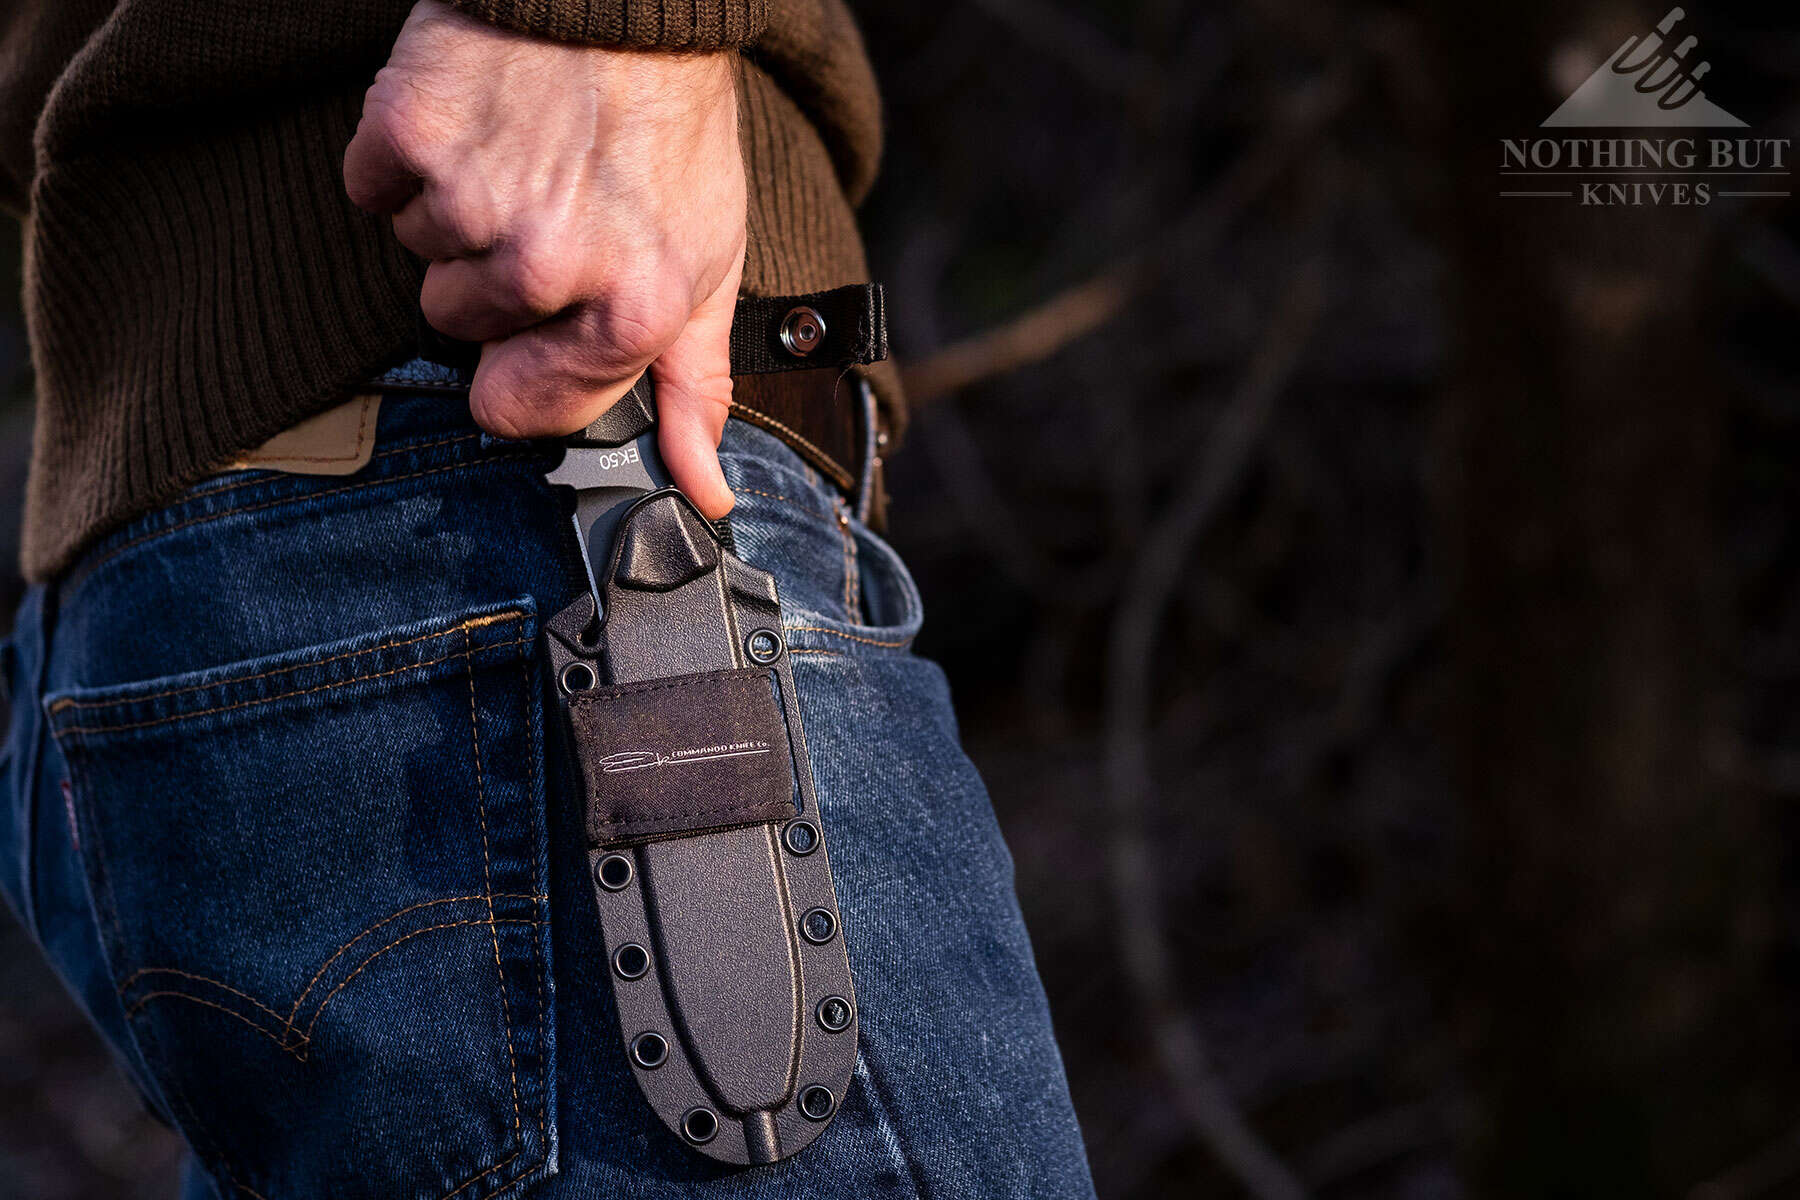 The EK Commando ships with a kydex sheath that folds the knife firmly in place.  